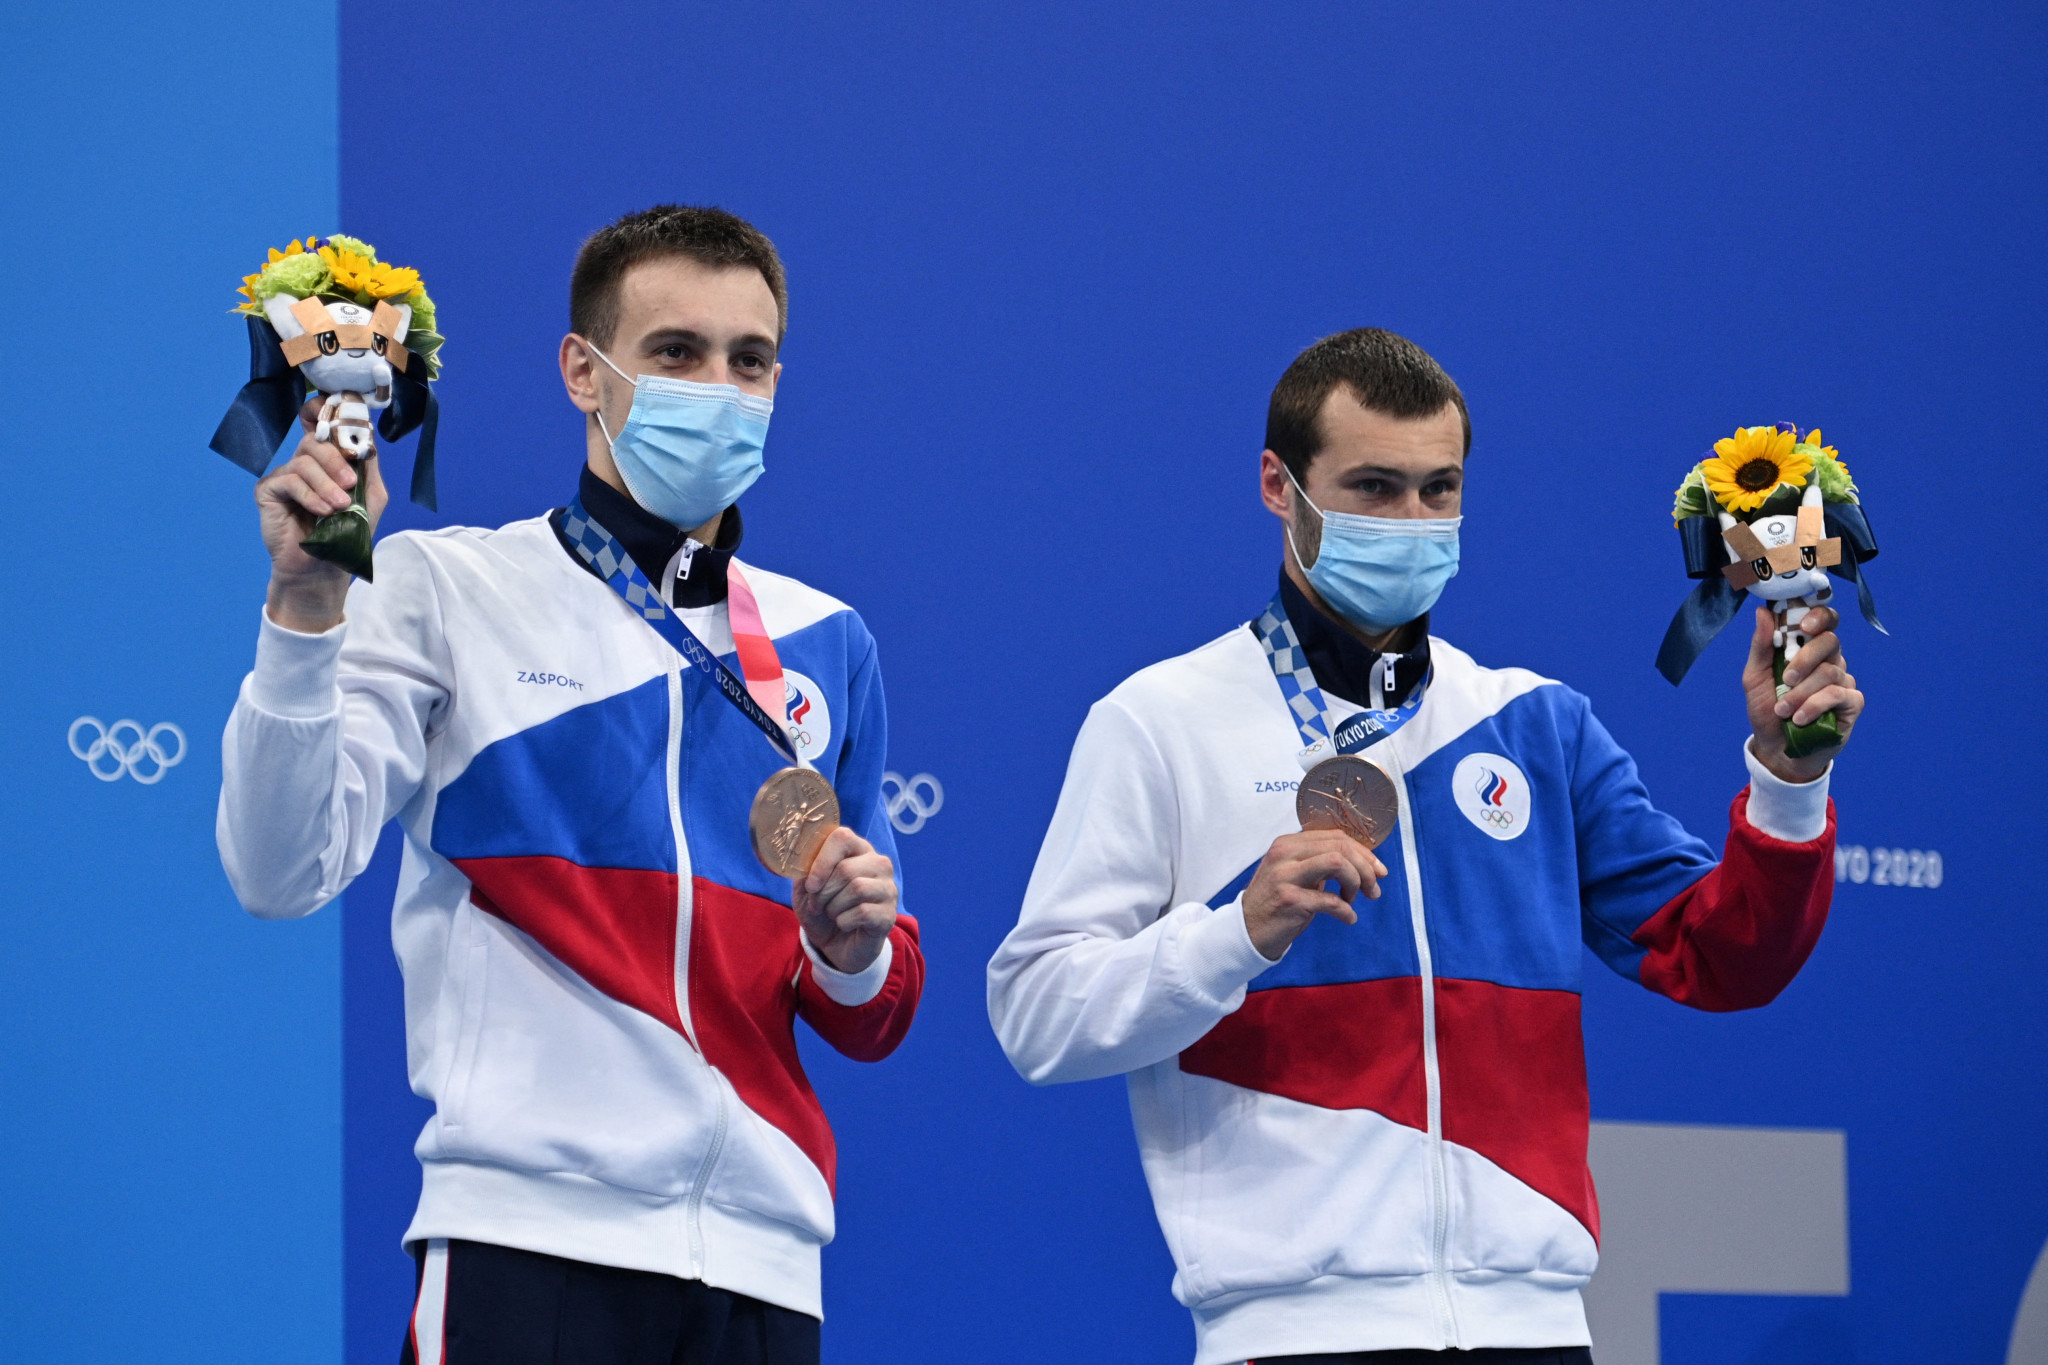 Men's synchronised diving platform pairing Oleksandr Bondar and Viktor Minibayev were the only diving medallists for the Russian Olympic Committee in Tokyo ©Getty Images